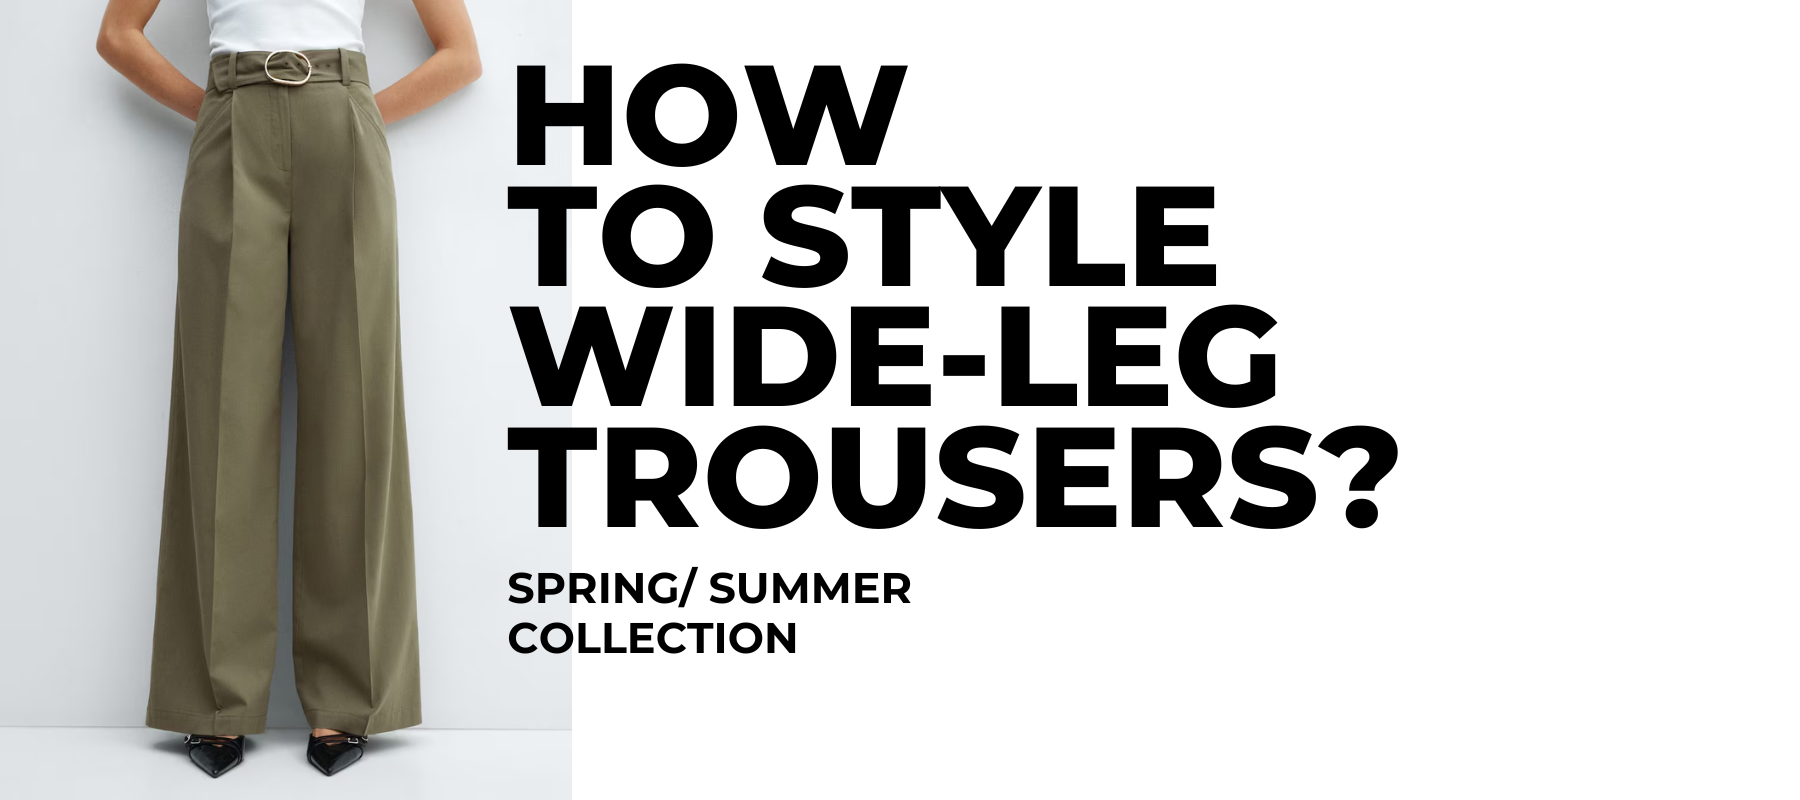 Wide leg trouser styling | What shoes to wear with wide leg trousers